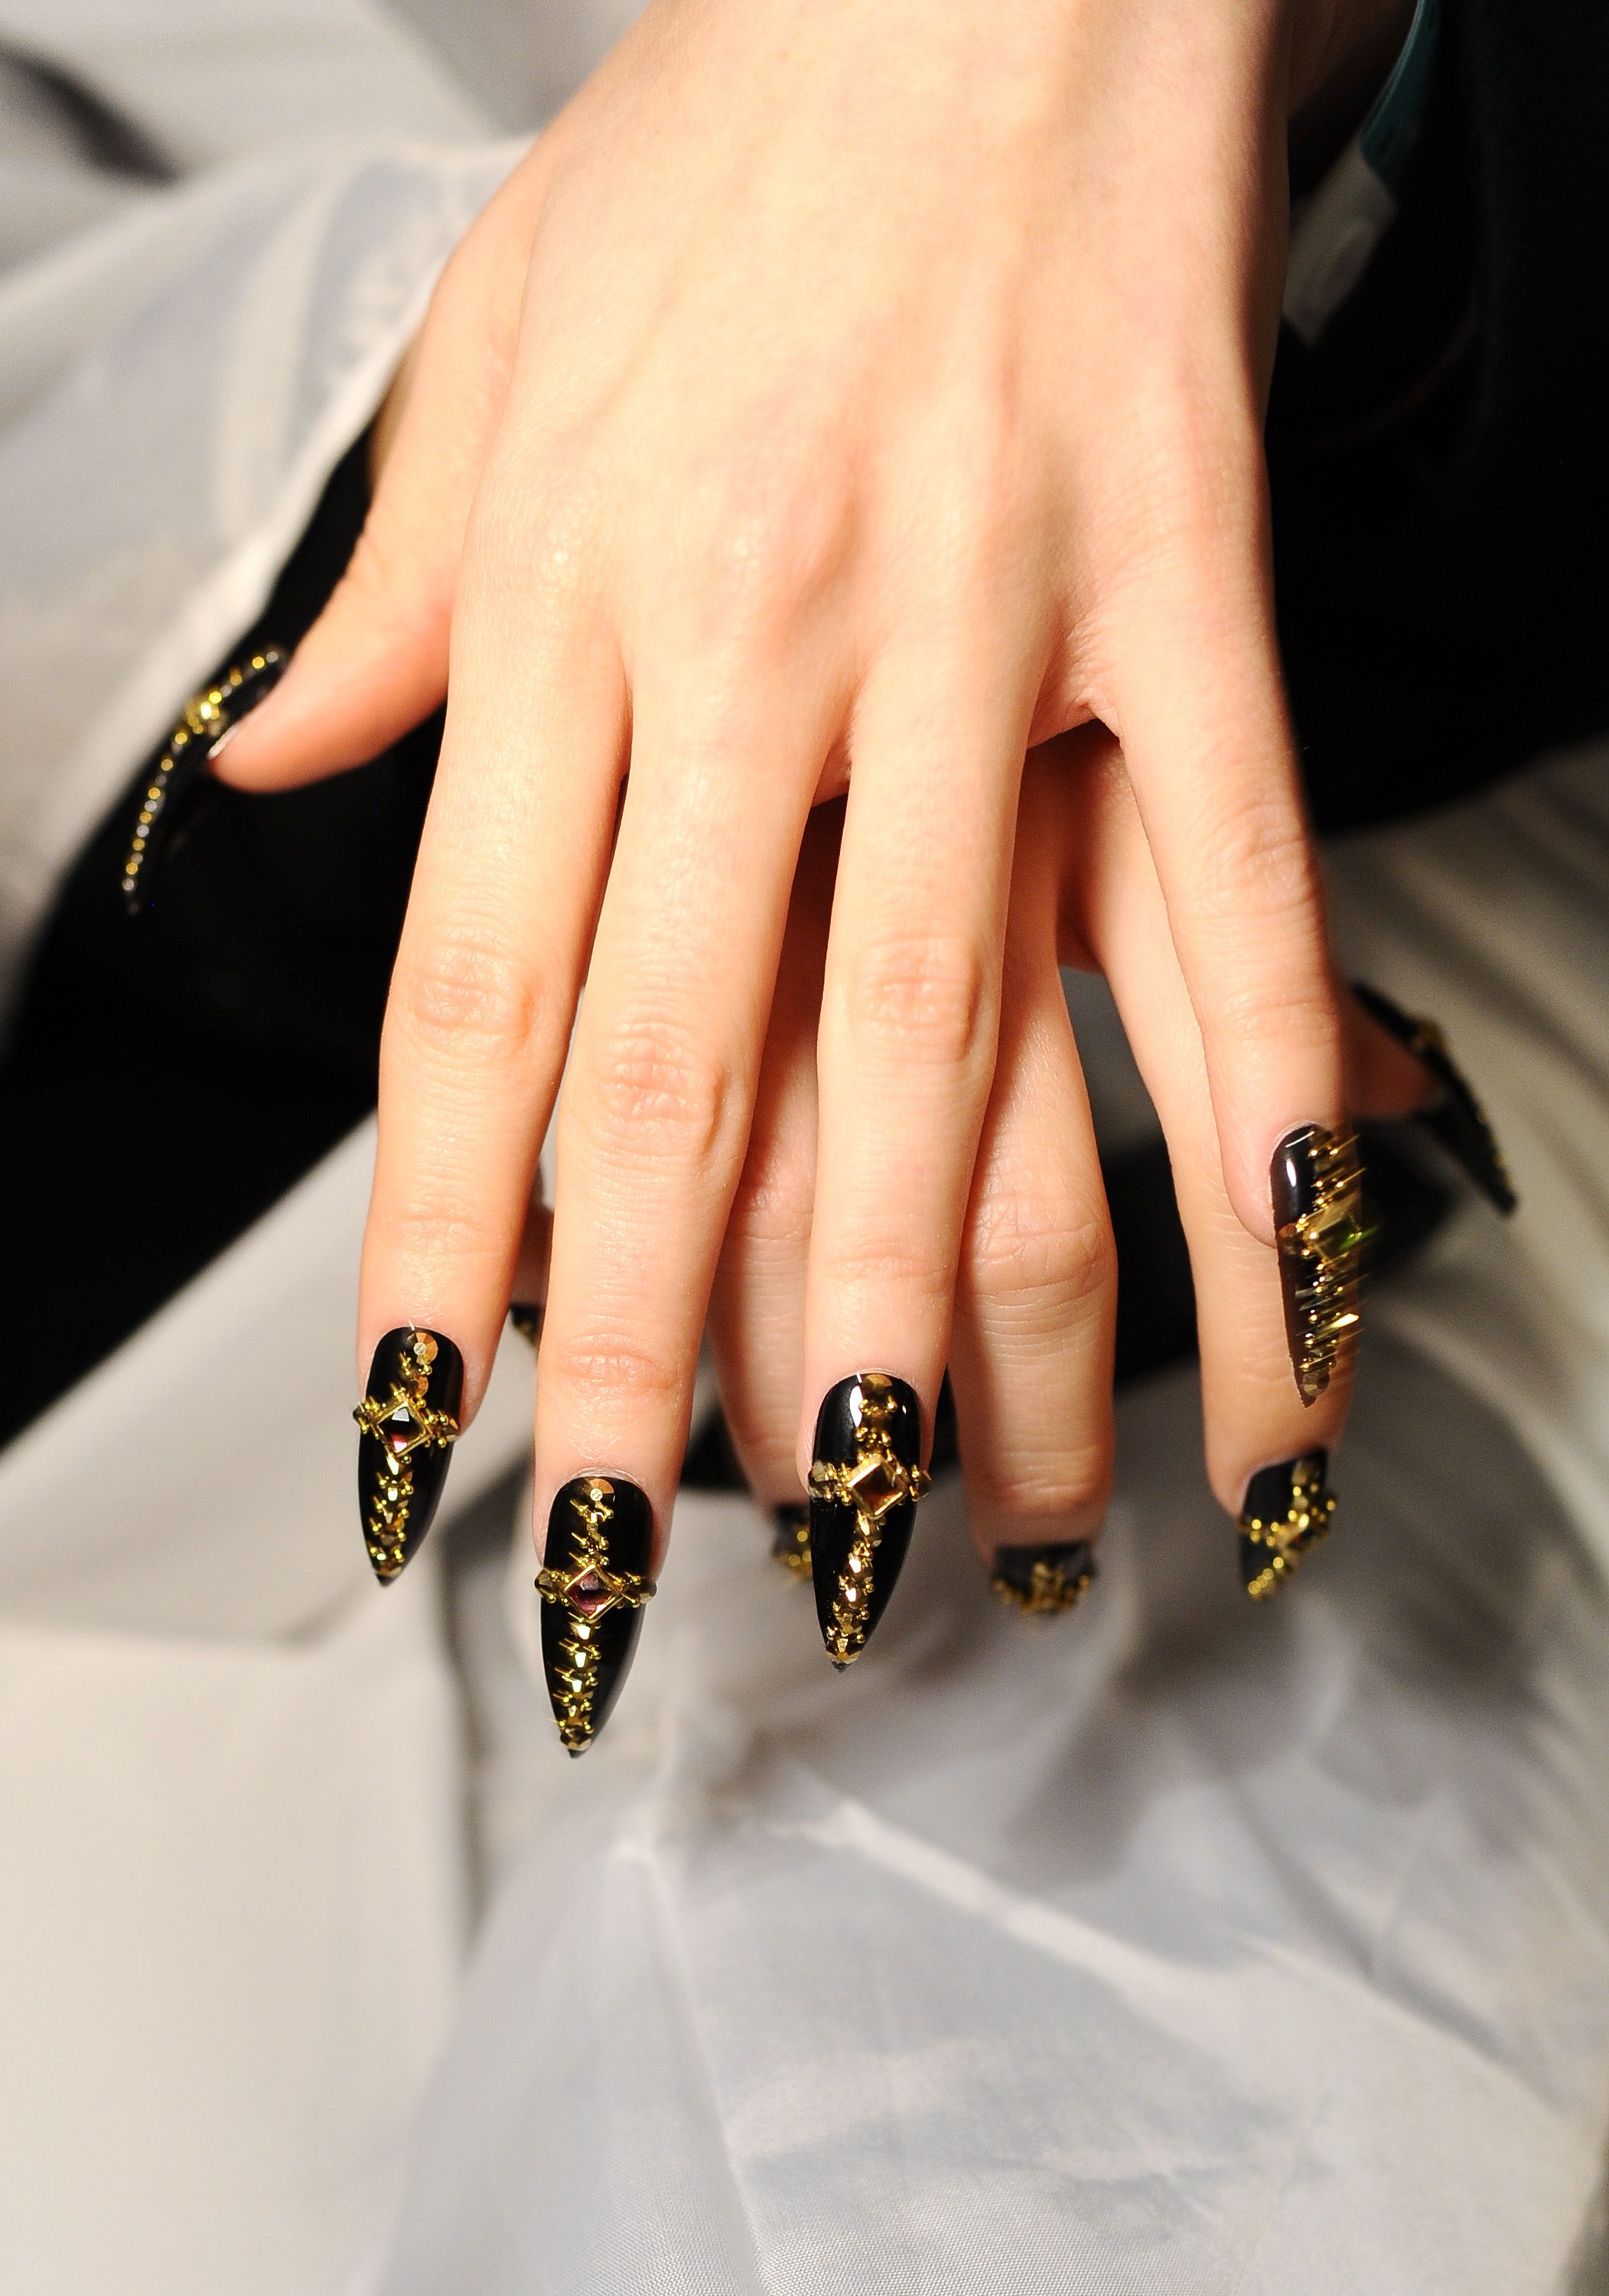 Our beauty ed's top 50 nail designs to try for 2022